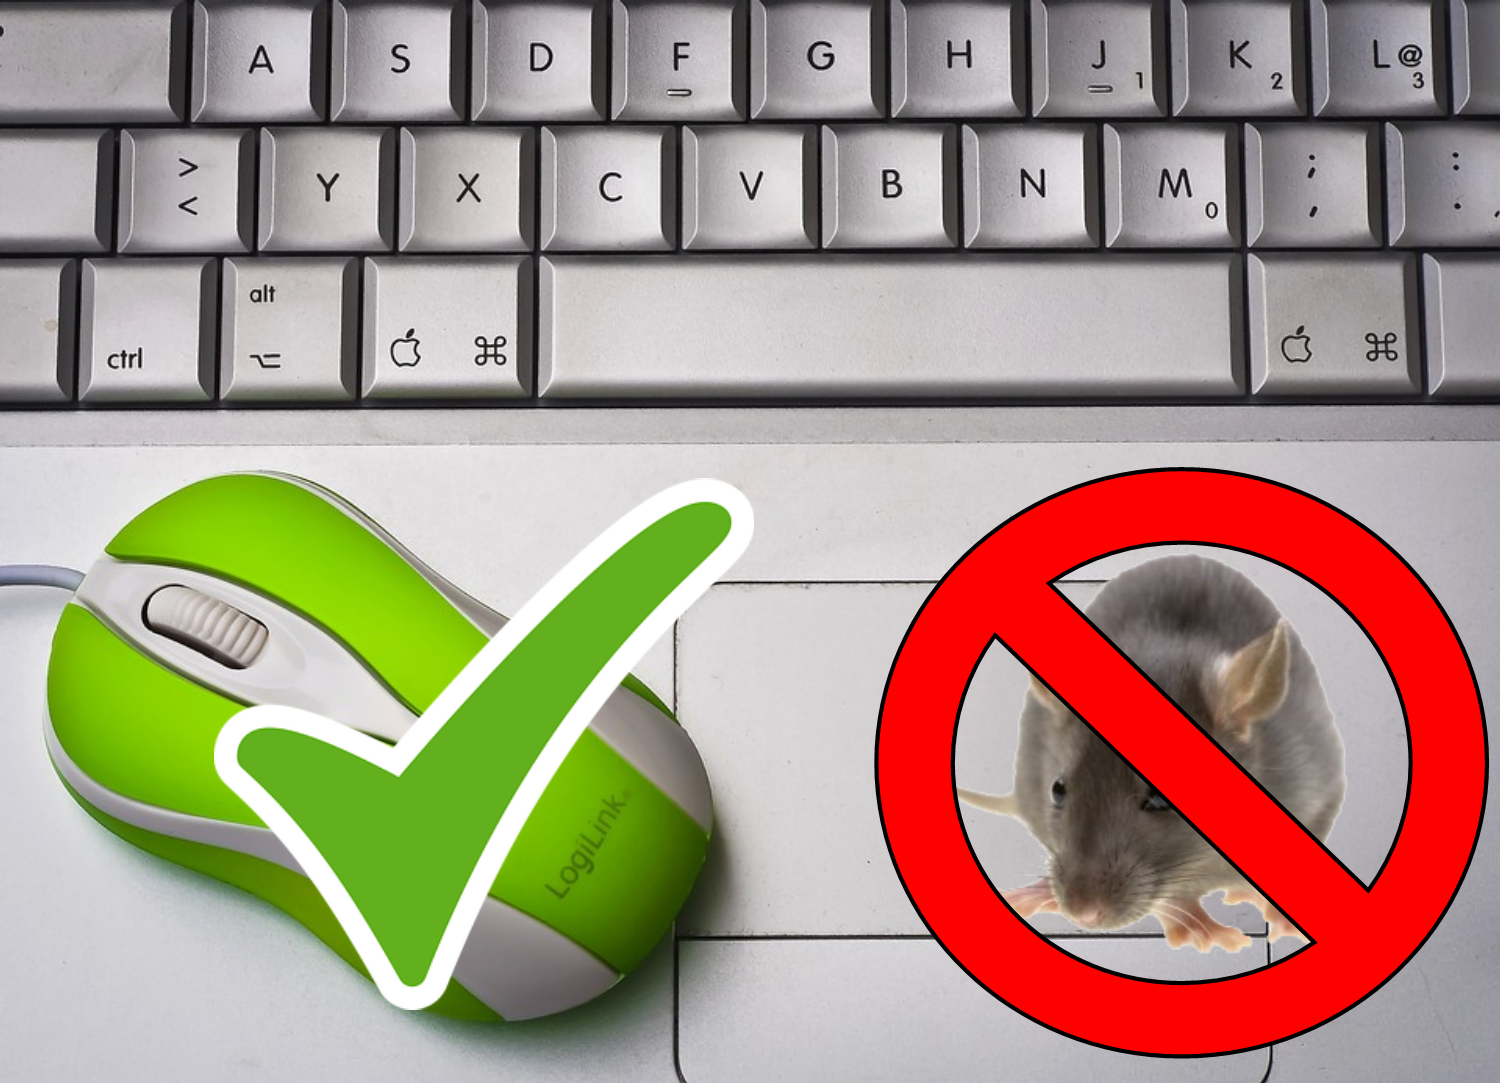 Meet the Mouse default image showing a keyboard with a computer mouse with a green checkmark next to the animal mouse with a red No symbol